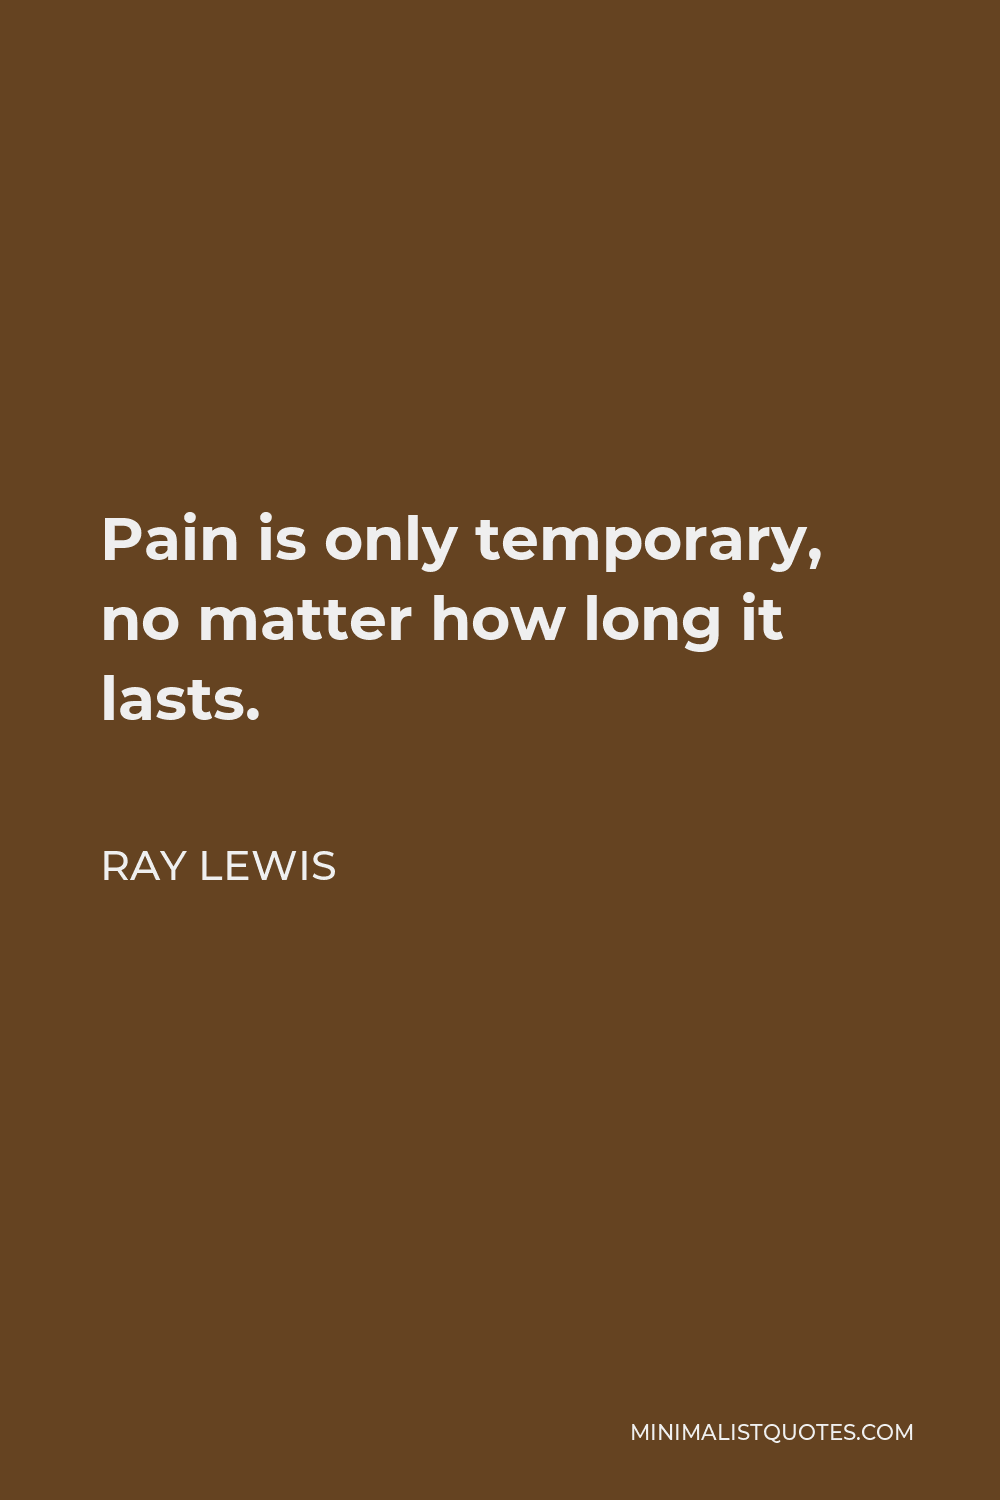 Ray Lewis Quote - Pain is only temporary, no matter how long it lasts.